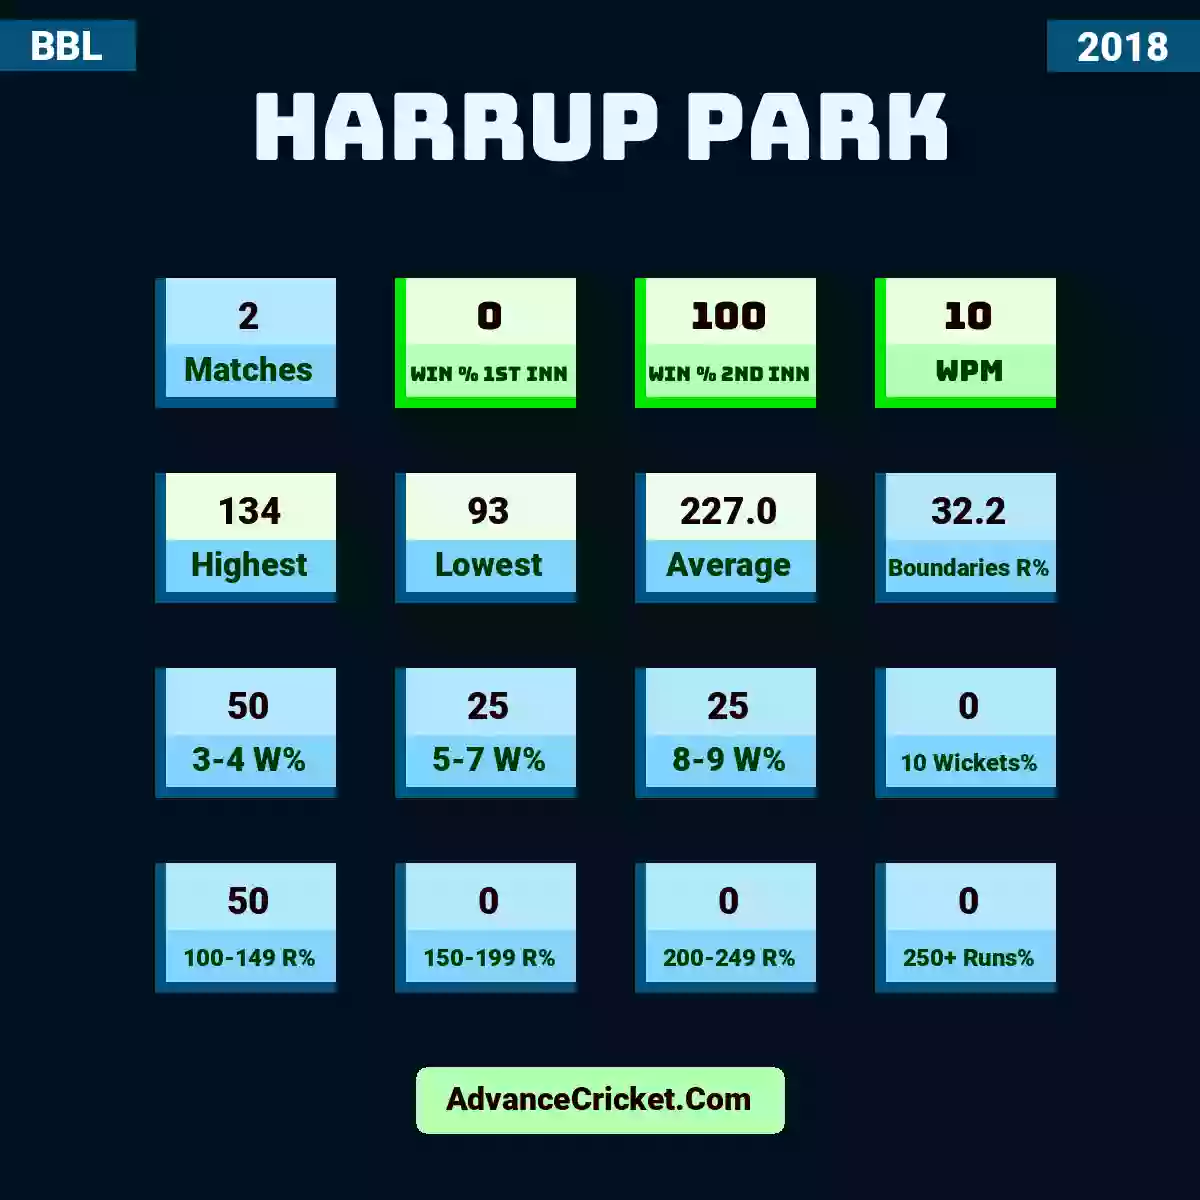 Image showing Harrup Park with Matches: 2, Win % 1st Inn: 0, Win % 2nd Inn: 100, WPM: 10, Highest: 134, Lowest: 93, Average: 227.0, Boundaries R%: 32.2, 3-4 W%: 50, 5-7 W%: 25, 8-9 W%: 25, 10 Wickets%: 0, 100-149 R%: 50, 150-199 R%: 0, 200-249 R%: 0, 250+ Runs%: 0.